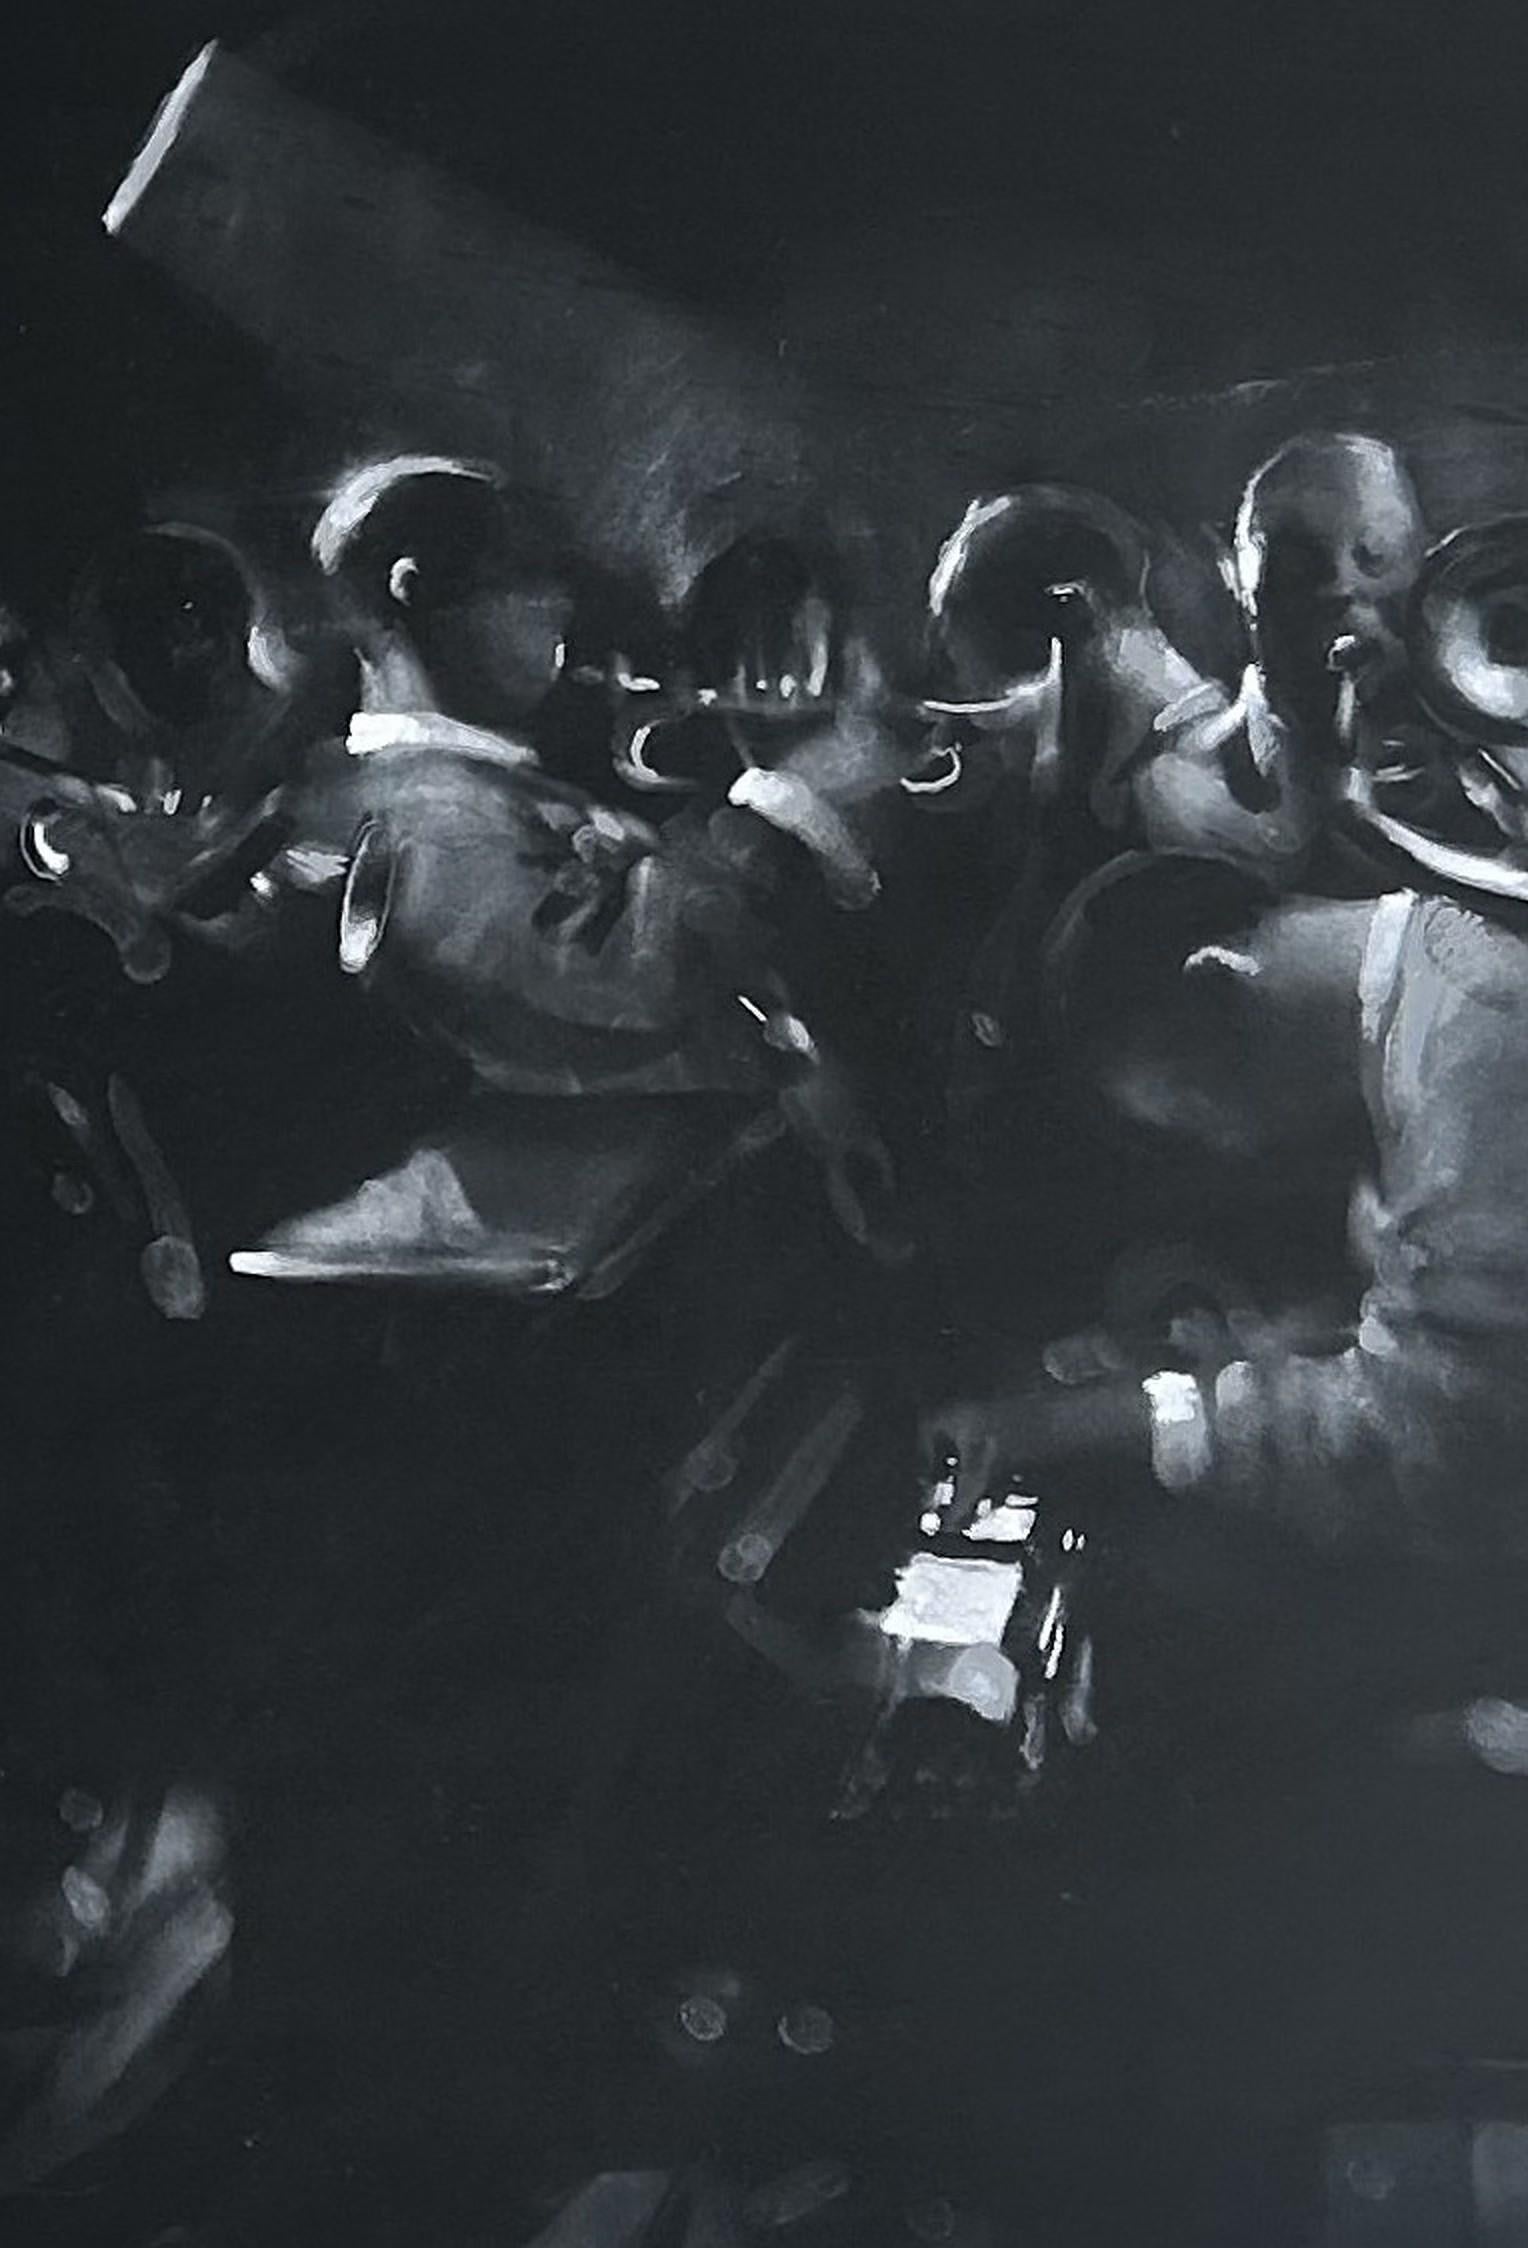 Untitled (Jazz Scene) is an original Charcoal & pastel drawing on paper by British artist Charlie Mackesy. Mackesy's clever work and style here give us a glimpse into this intimate & atmospheric depiction of a Jazz Bar. The sounds from the band